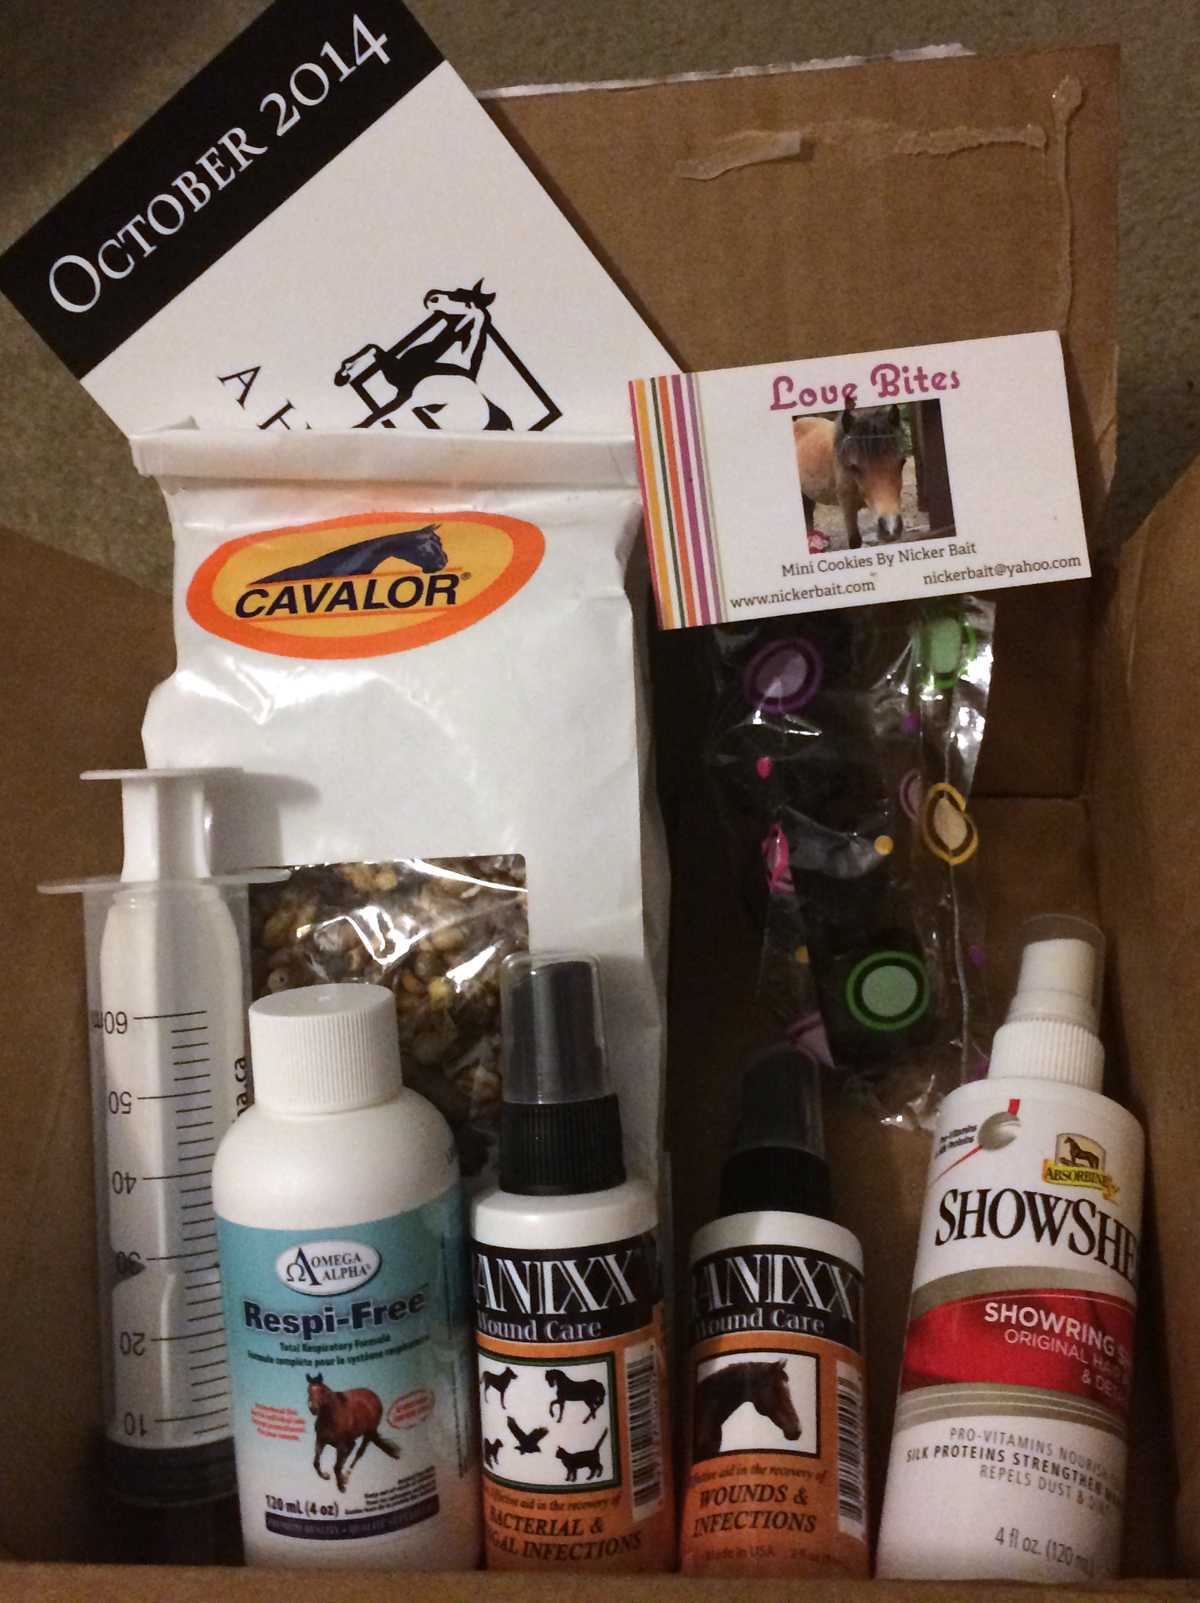 A Horse Box October 2014 review with Banixx, Showsheen Spray, Respi-free, Cavalor Fifty-Fifty, and NickerBait Love Bites.